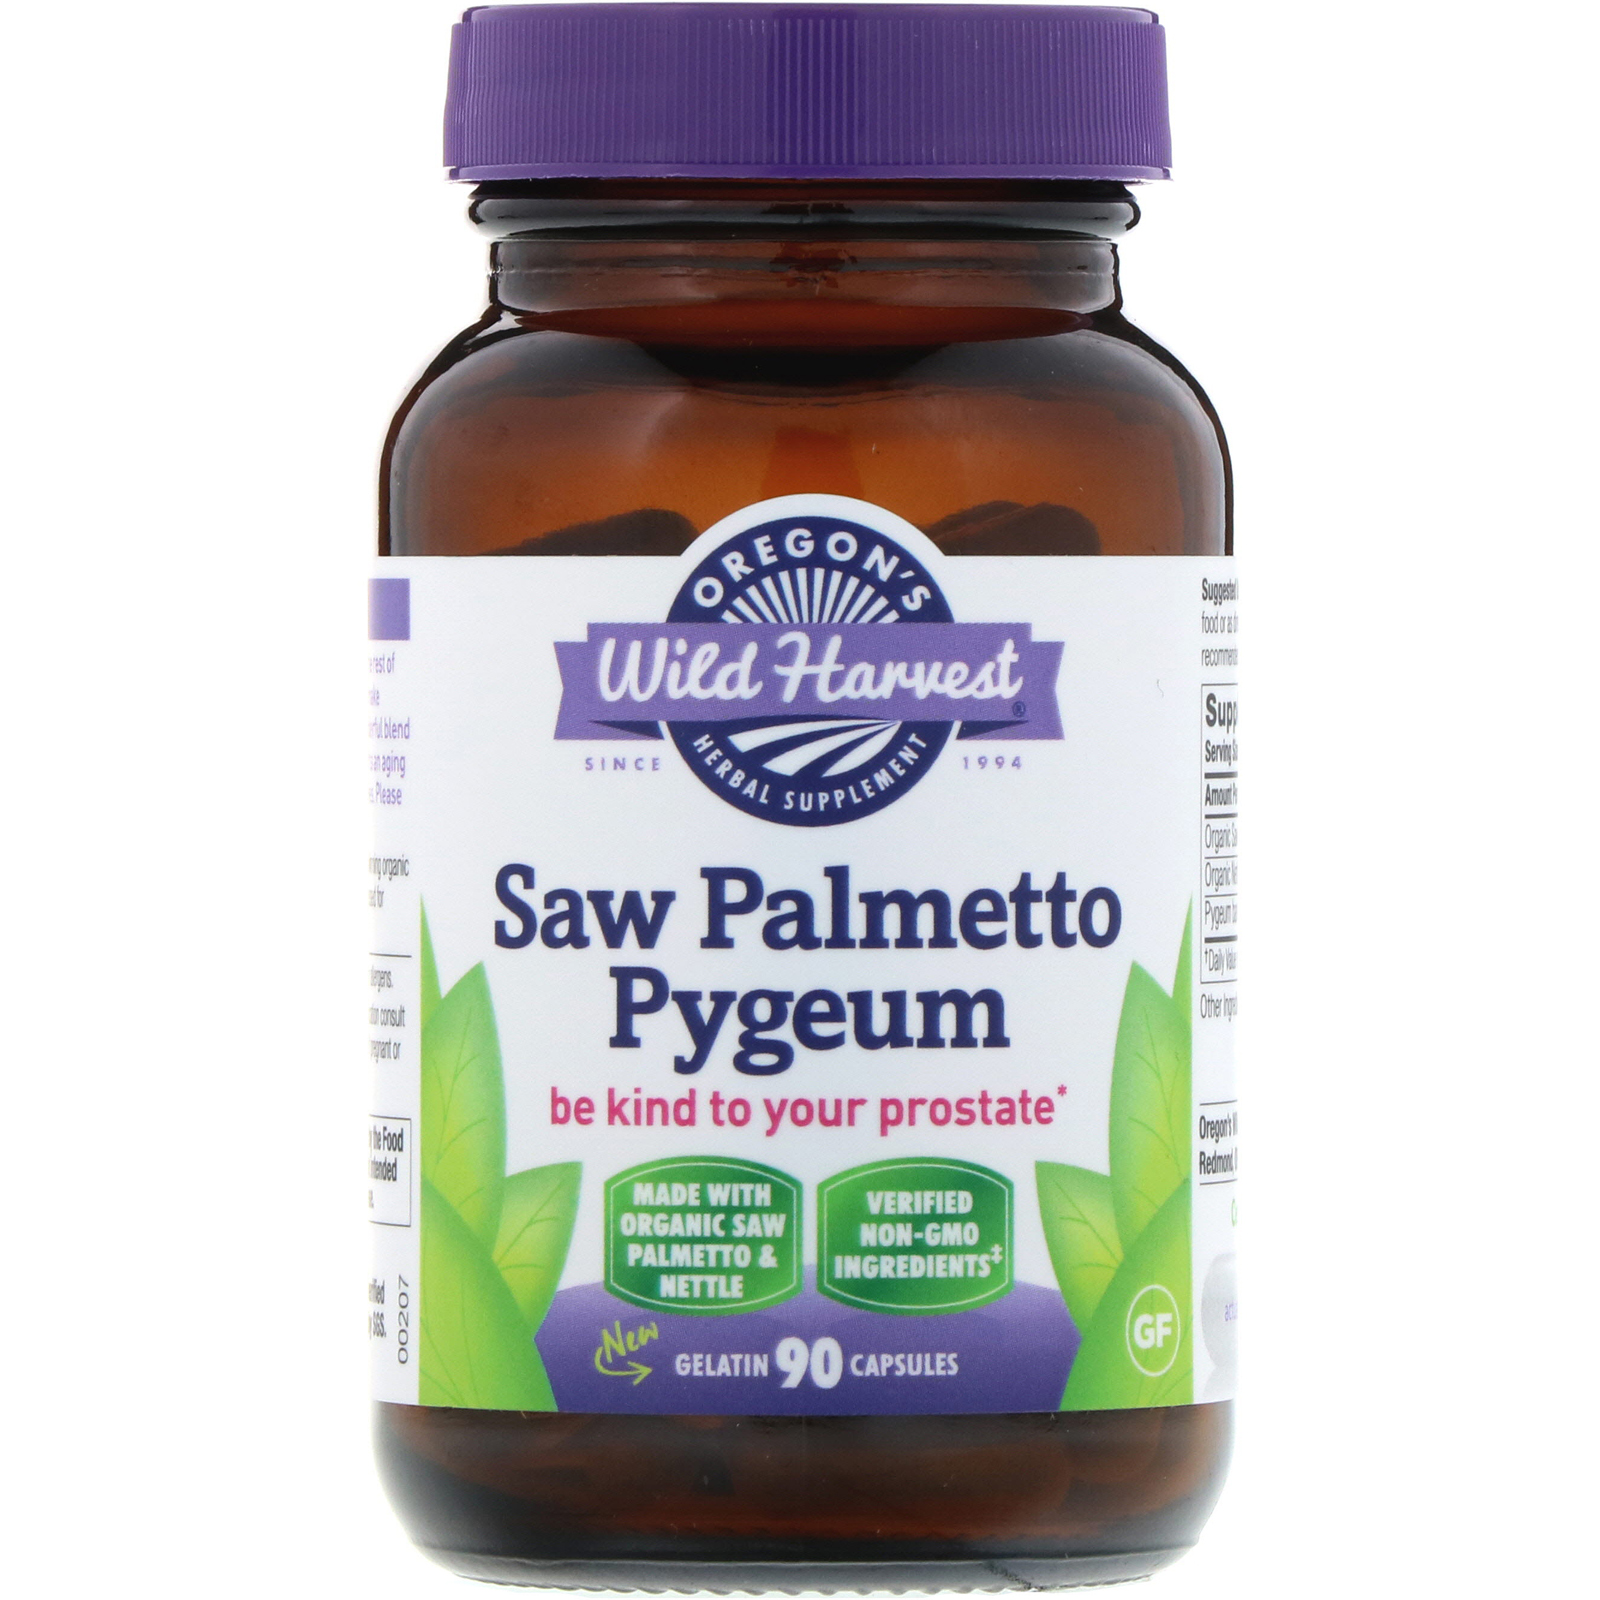 Nettle root palmetto pygeum hair loss saw Do Natural